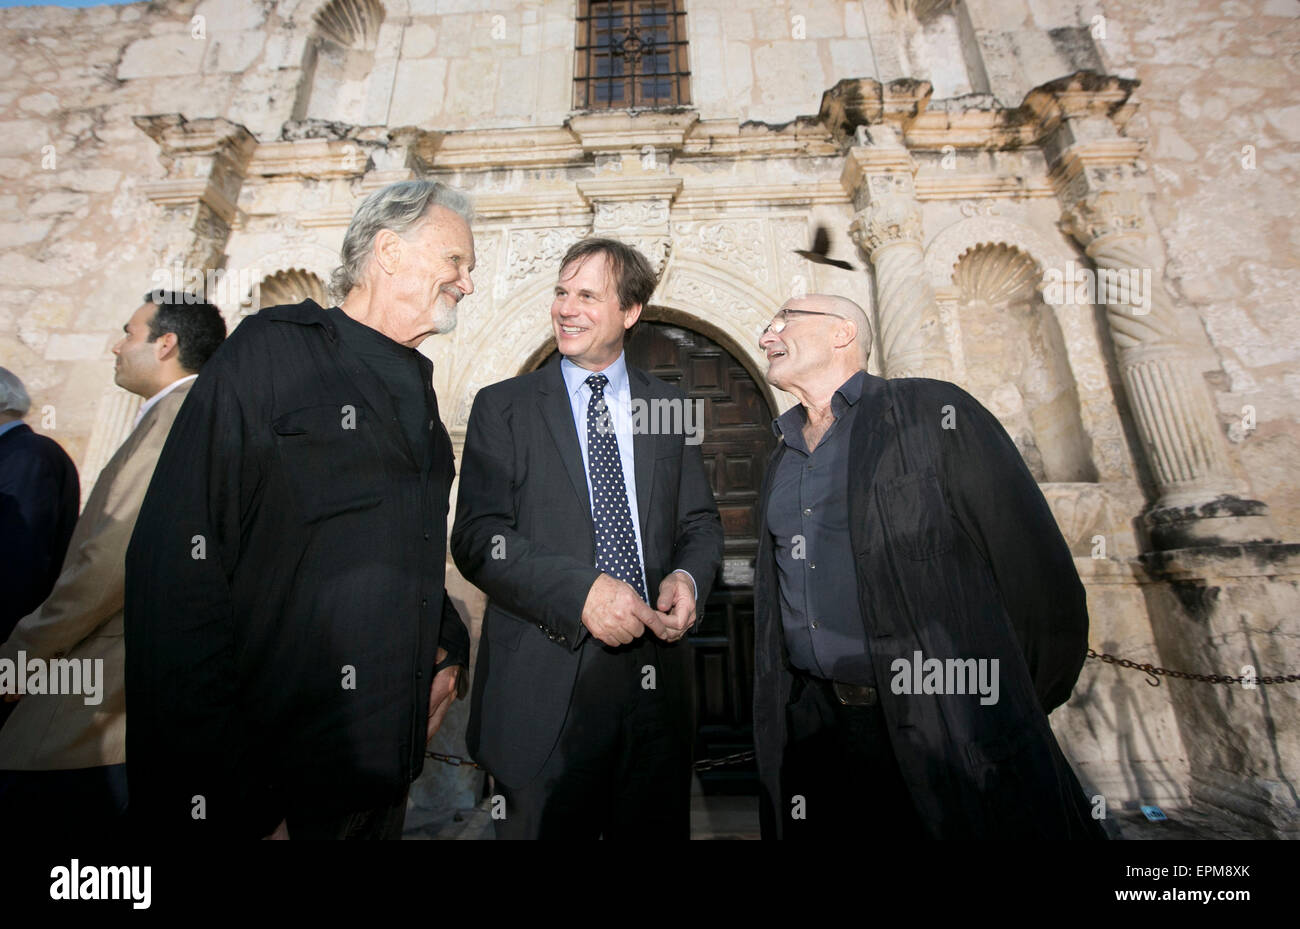 Bill Paxton and Kris Kristofferson together with singer Phil Collins in front of the Alamo in San Antonio, Texas Stock Photo